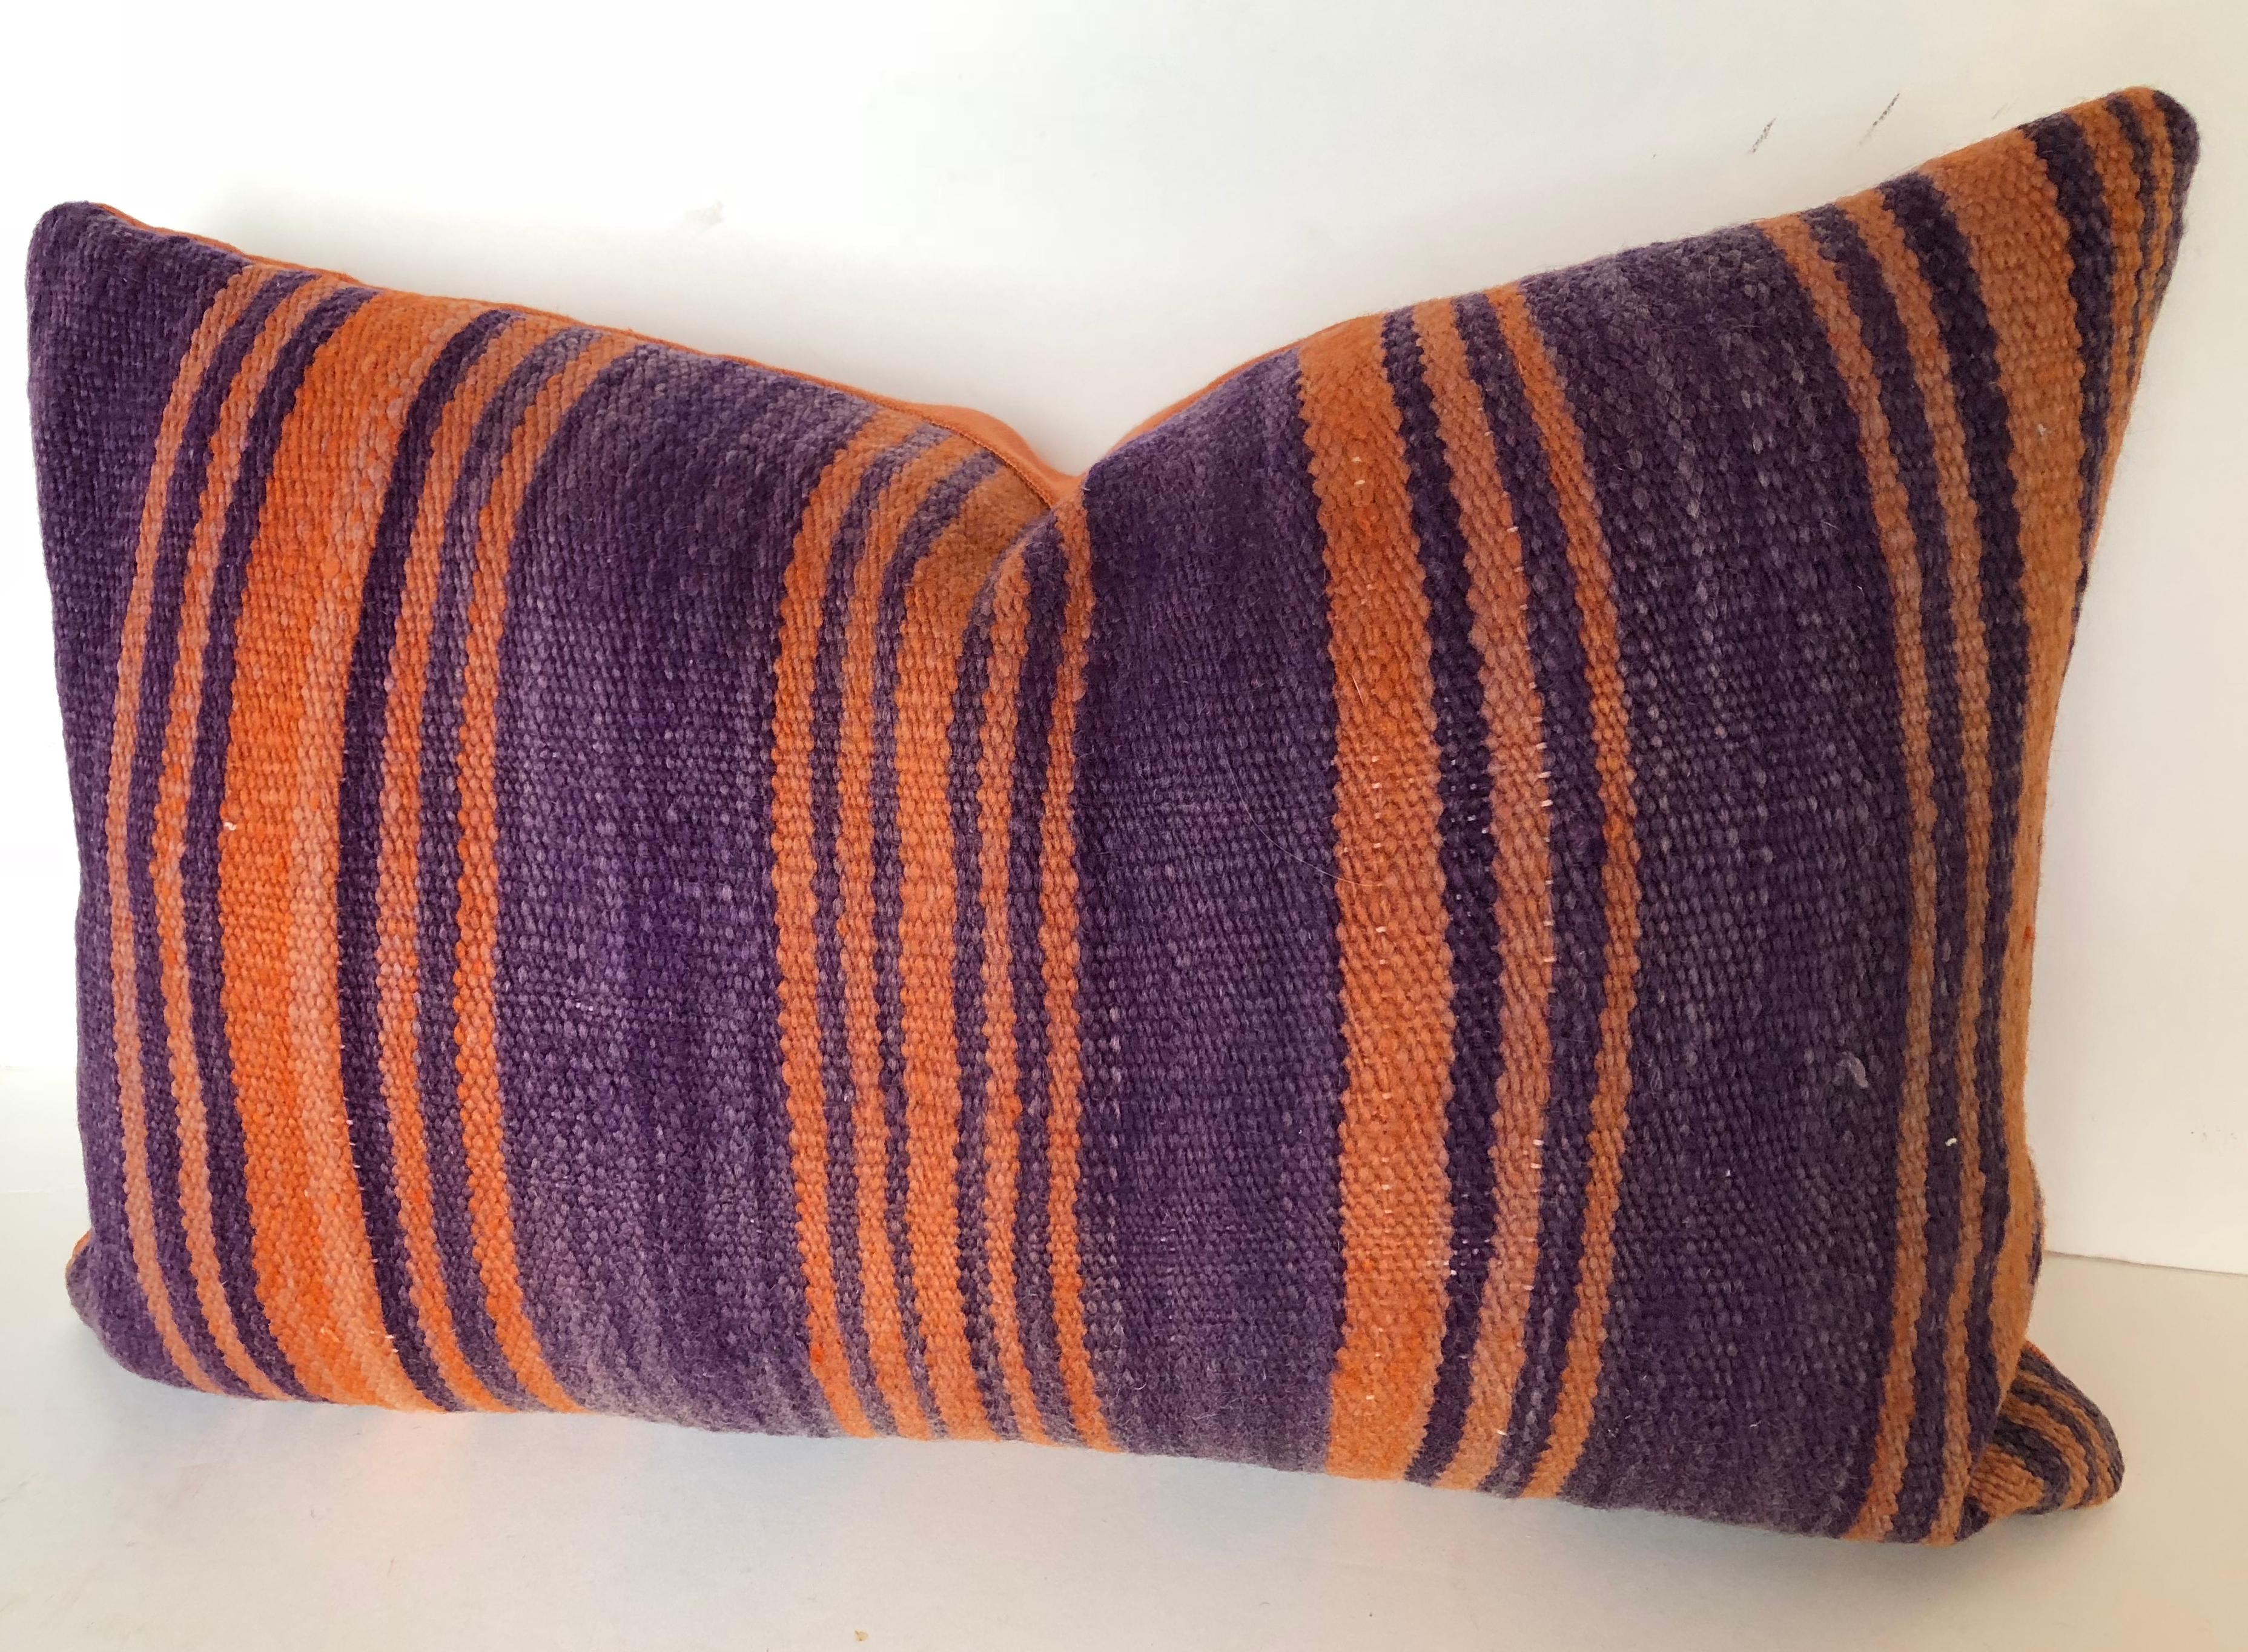 Custom pillow cut from a vintage hand-loomed wool Moroccan Berber rug from
the Atlas Mountains. Wool is soft and lustrous with good color in shades of purple and apricot. Pillow is backed in apricot linen, filled with an insert of 100% down and